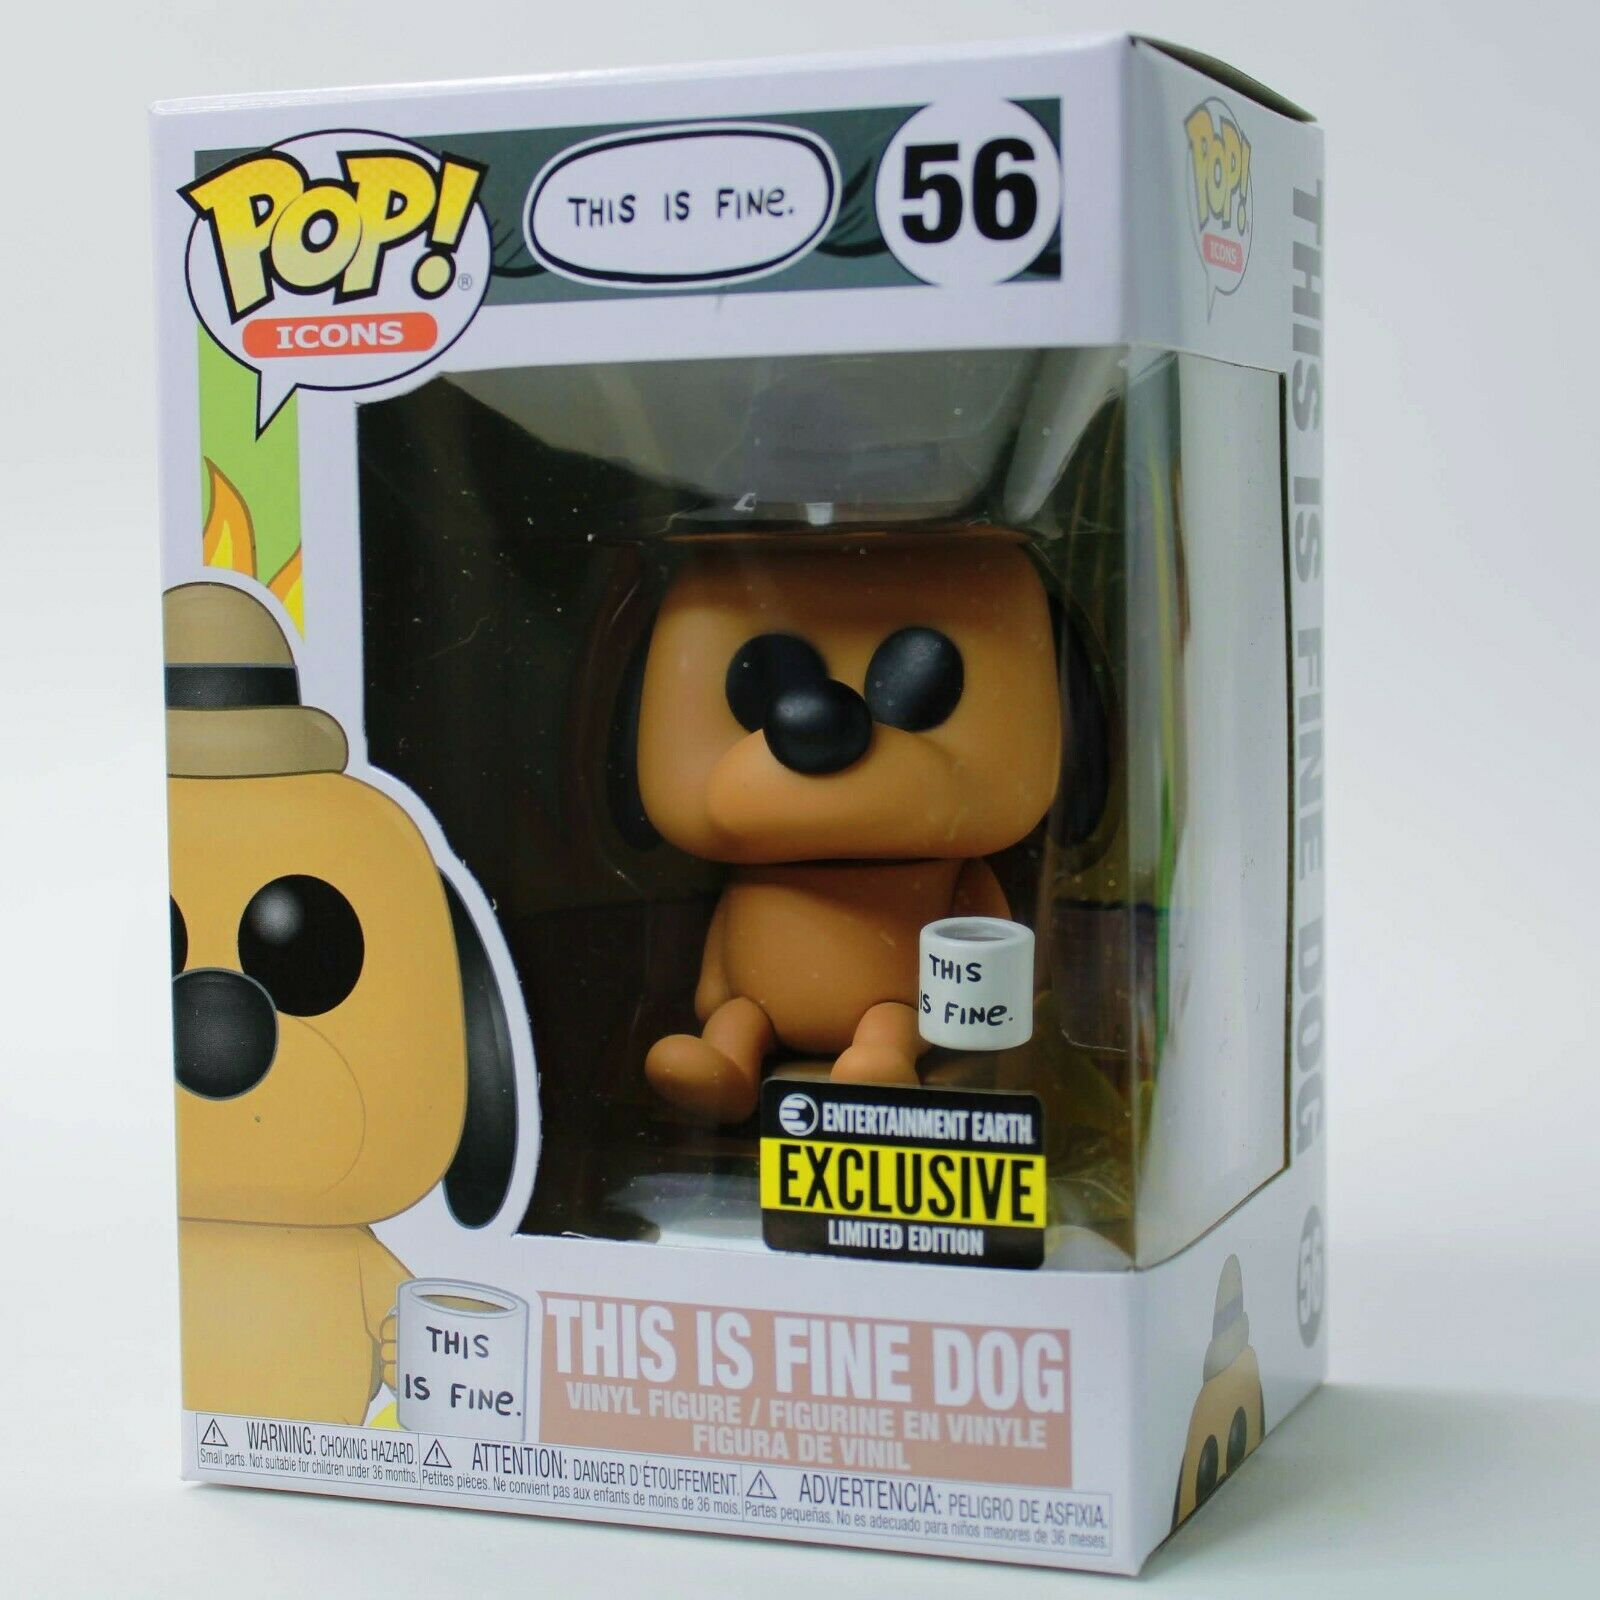 POP! Icons: 56 This is Fine., This is Fine Dog Exclusive